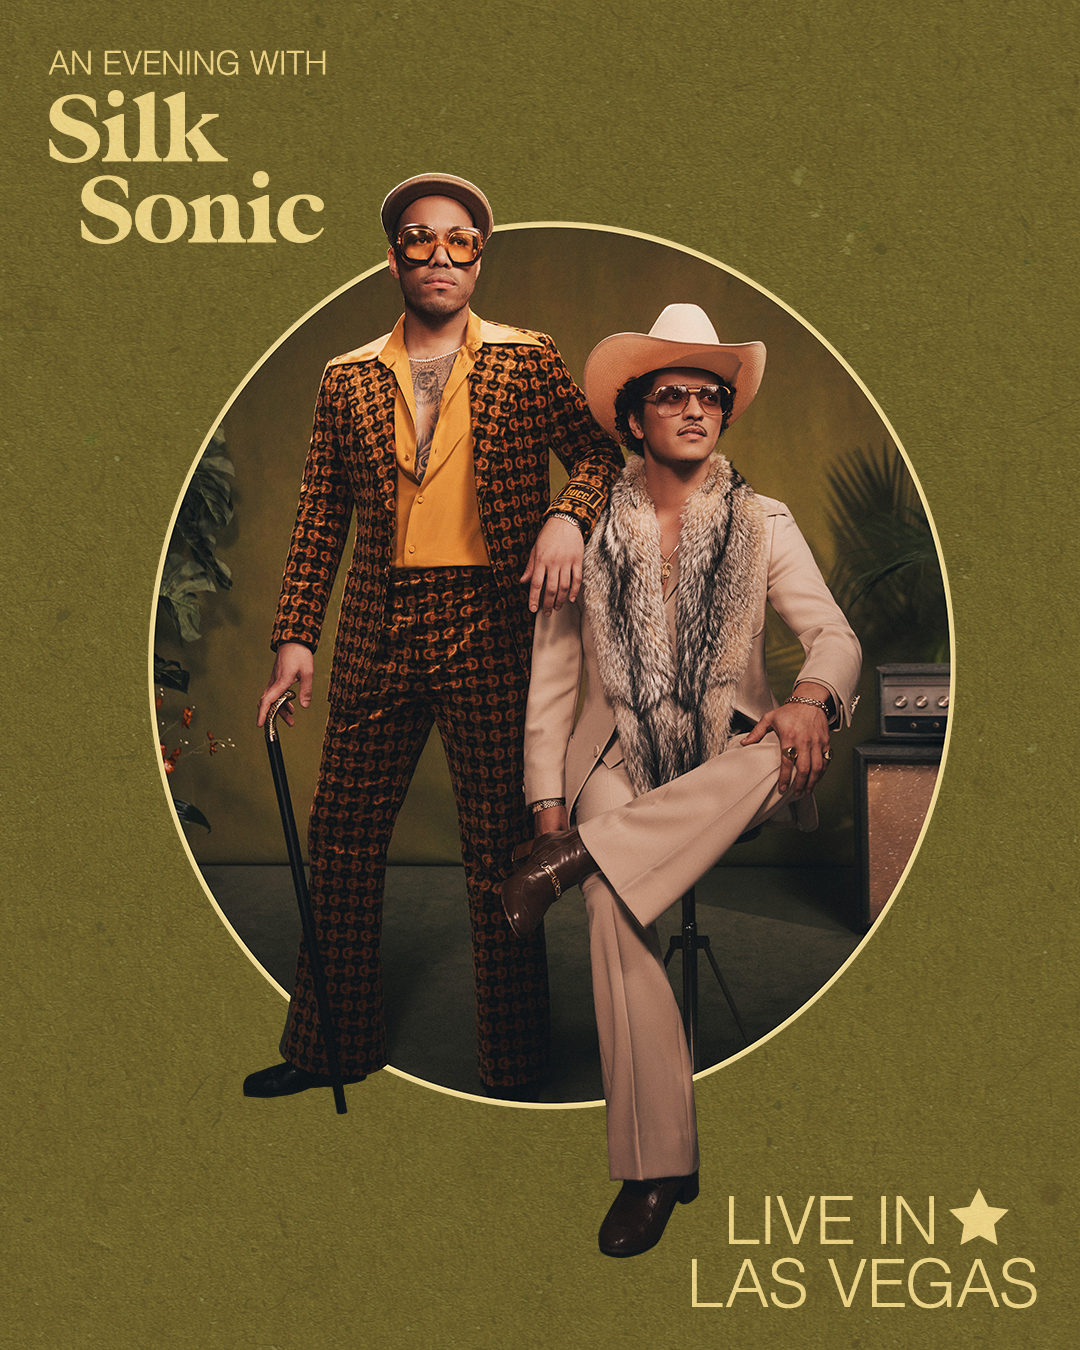 Silk Sonic are seen in a Vegas flyer